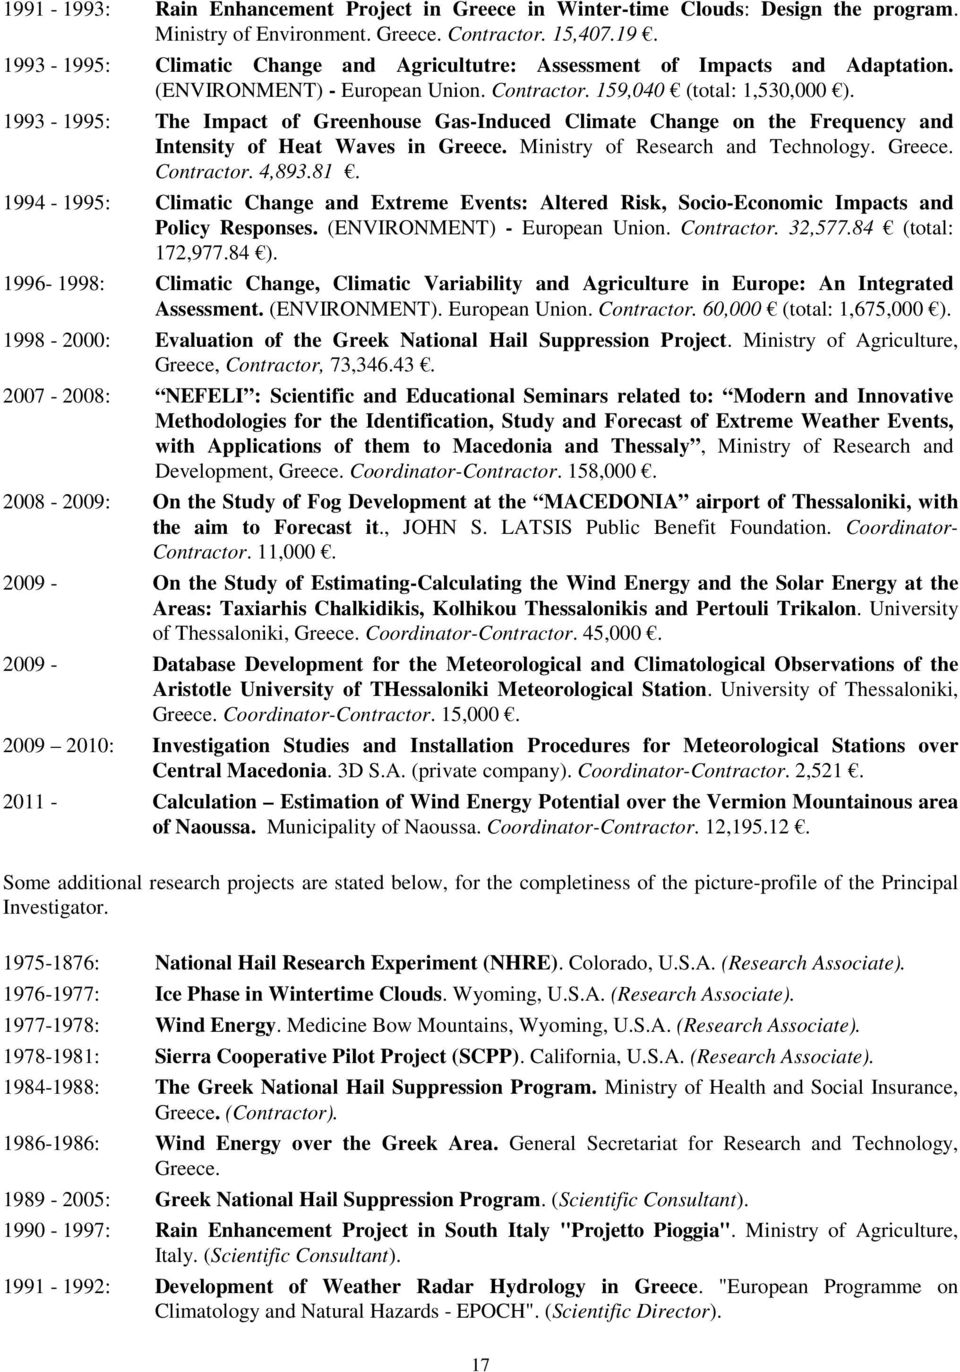 Ministry of Research and Technology. Greece. Contractor. 4,893.81. 1994-1995: Climatic Change and Extreme Events: Altered Risk, Socio-Economic Impacts and Policy Responses.